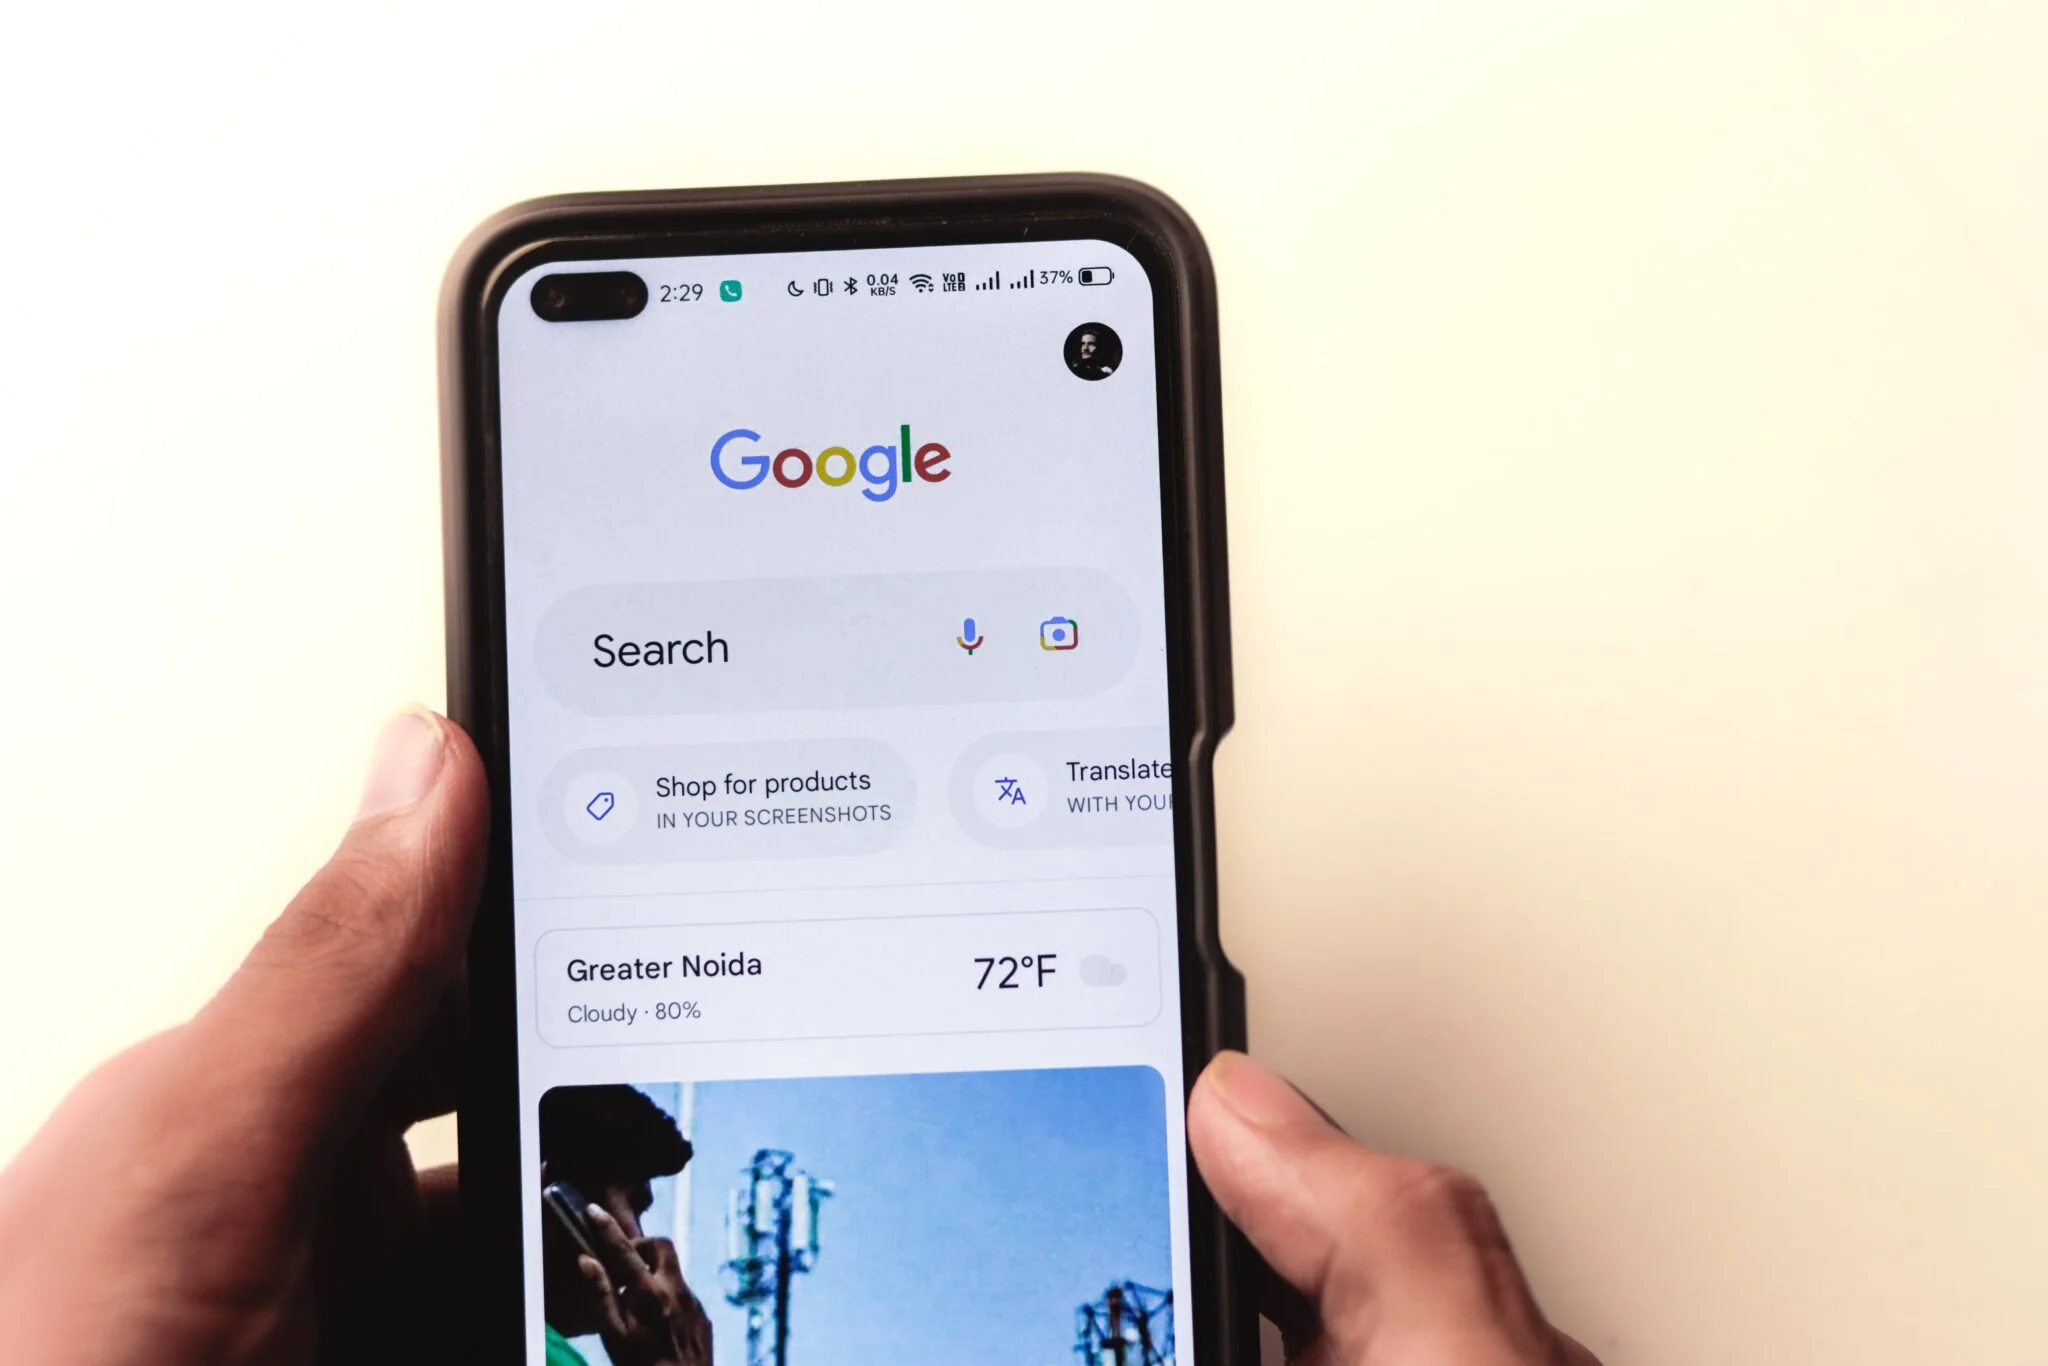 A person holding a smartphone displaying the Google search homepage, with options like ‘Search’, ‘Shop for products’, and ‘Translate’ visible on the screen, along with weather information for Greater Noida.